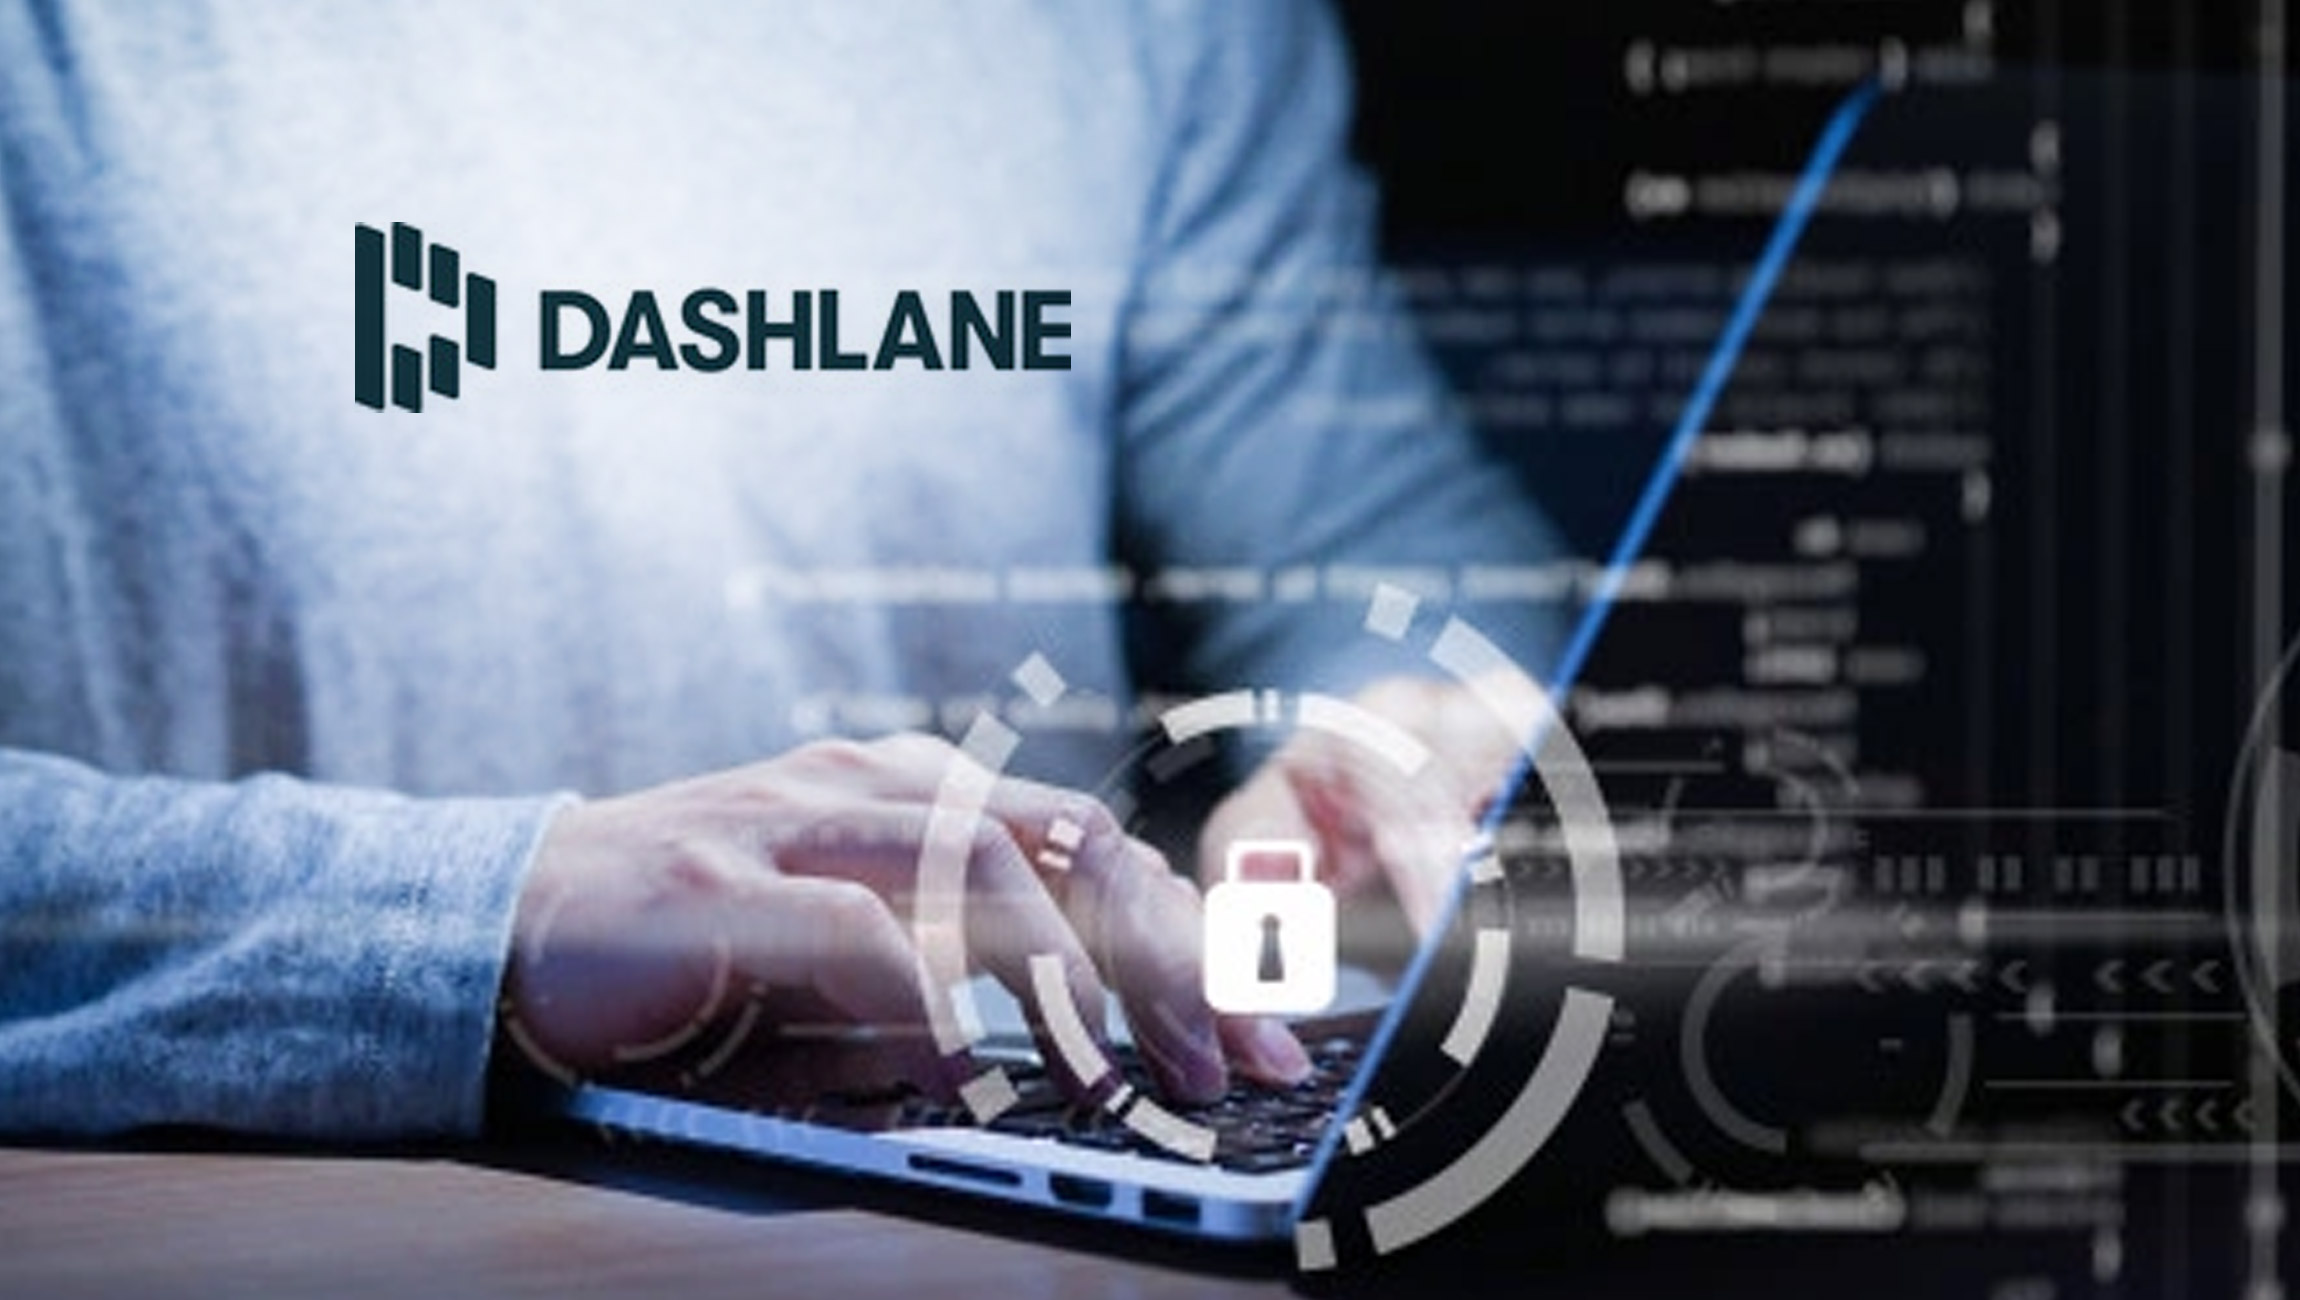 Dashlane Presents Panel of Cybersecurity Experts to Discuss Trends and Predictions for for the Industry in 2022